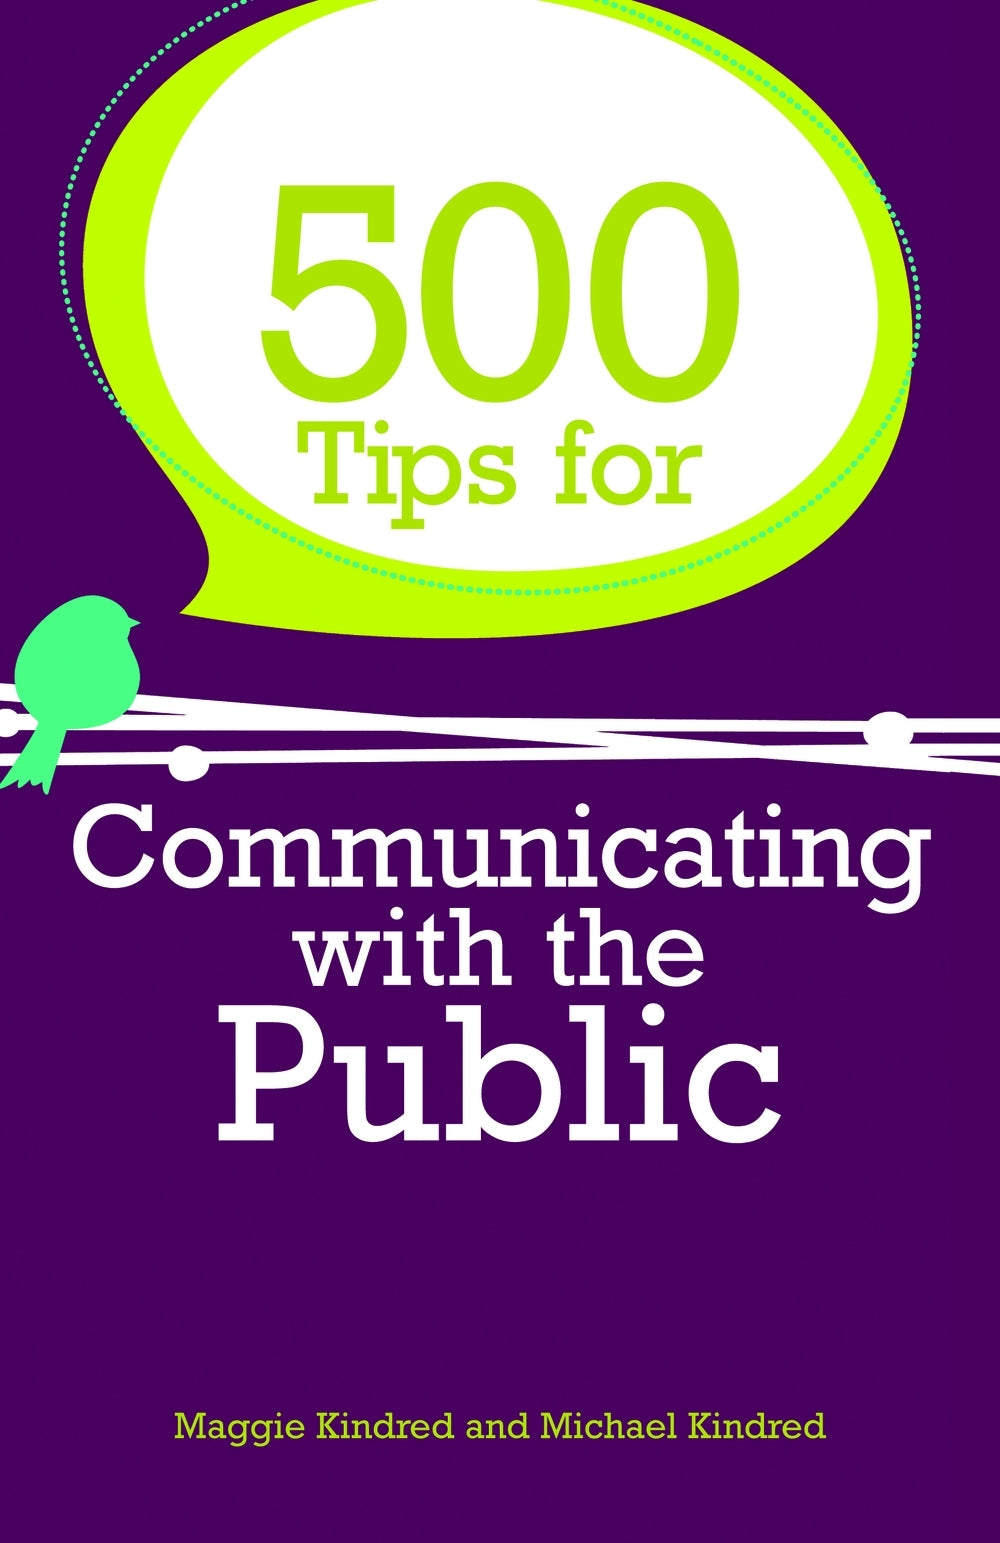 500 Tips for Communicating with the Public by Maggie Kindred, Michael Kindred